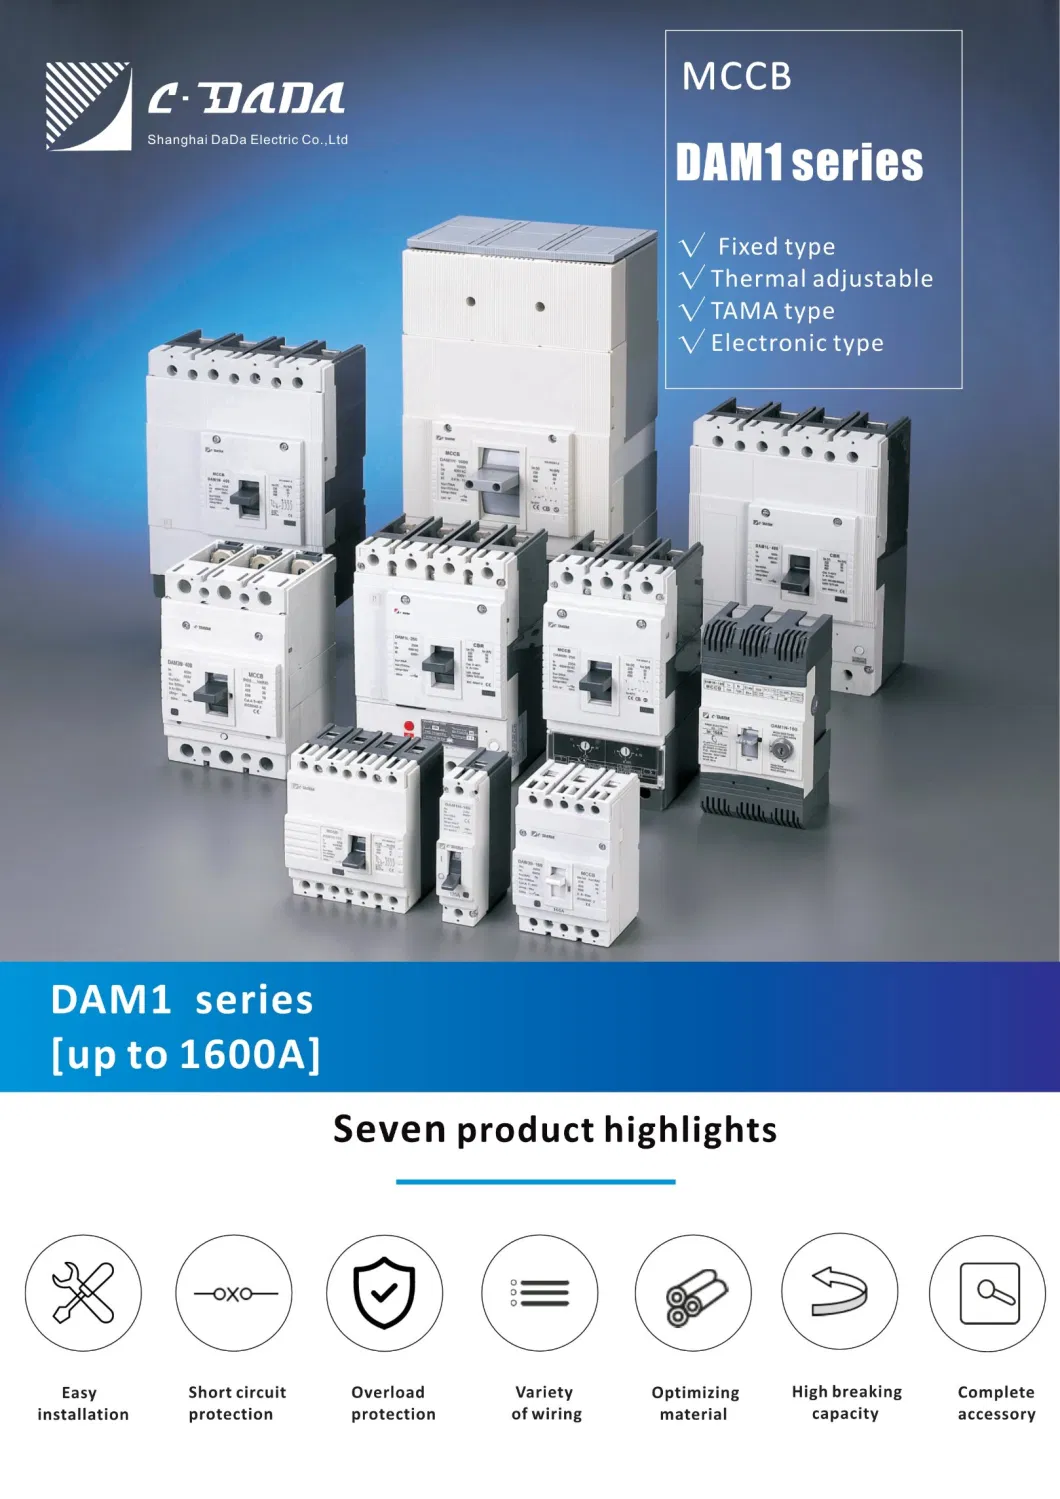 Overcurrent Protection CB Approved 250, 315, 400, 500, 630A Moulded Case Circuit Breaker 400A MCCB